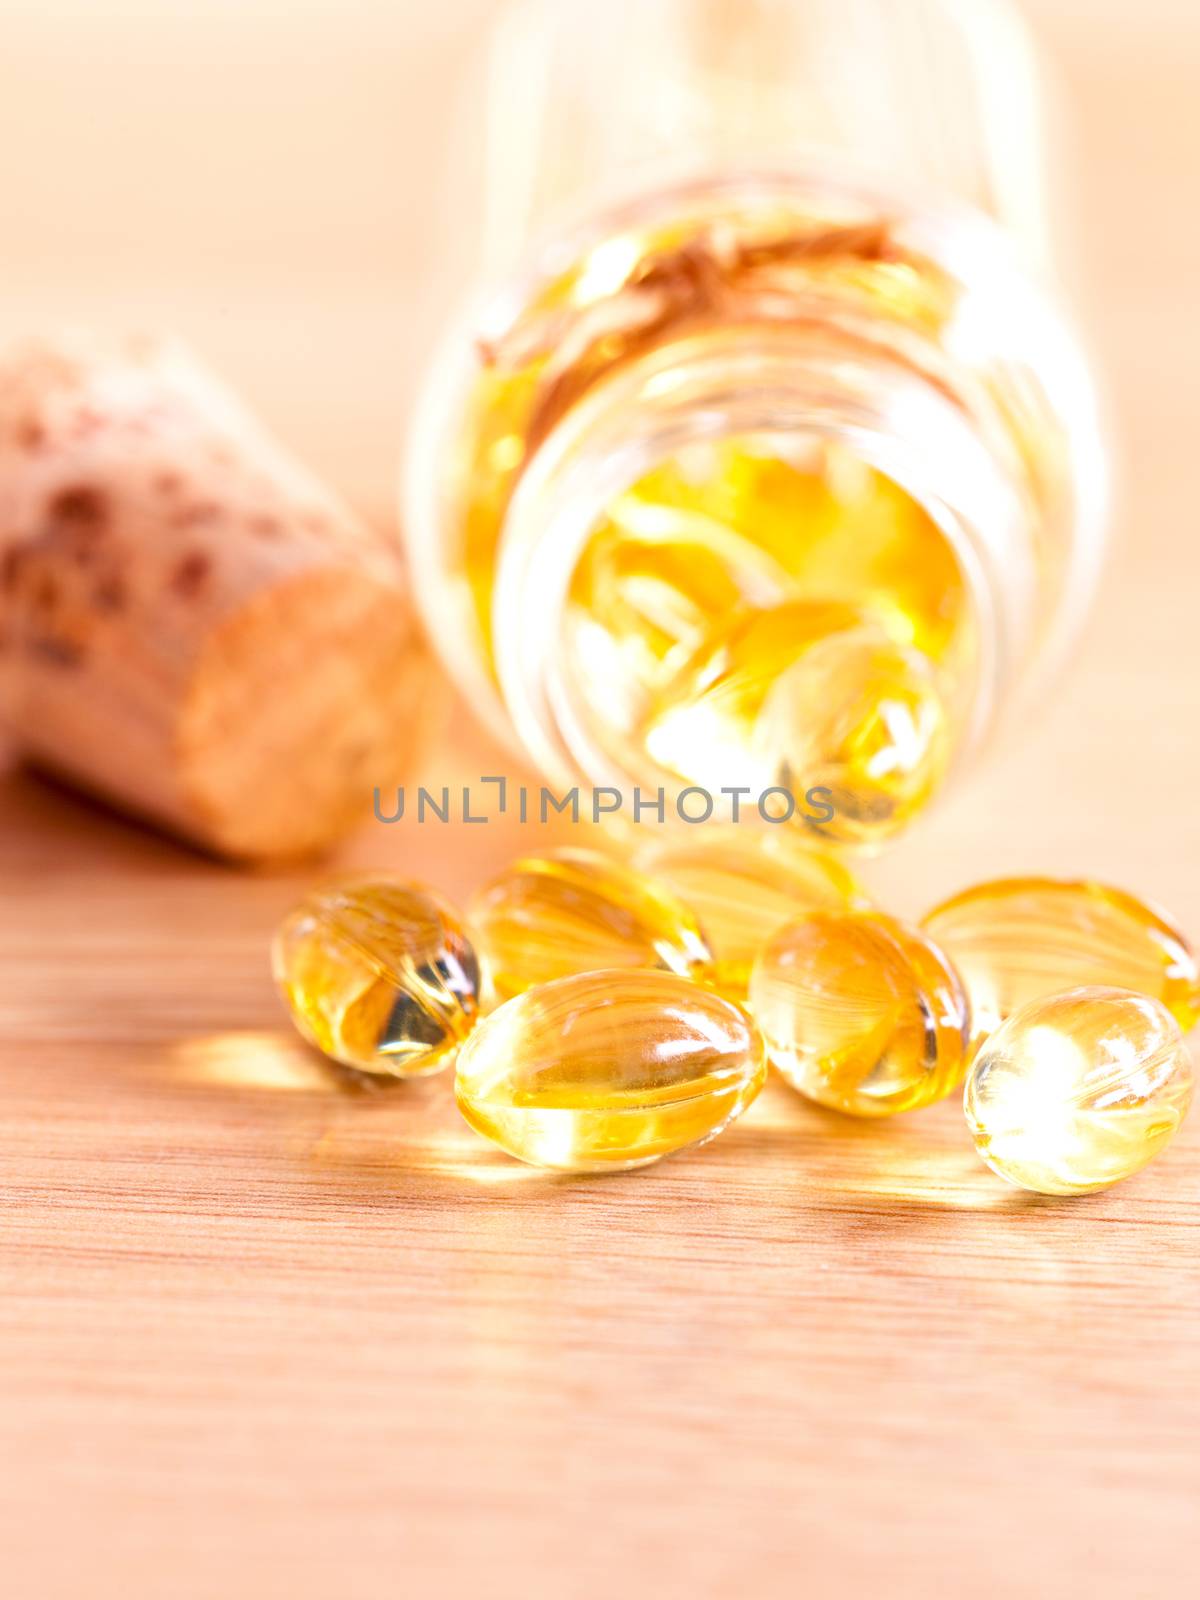 Cod liver oil capsules  on wooden panel .